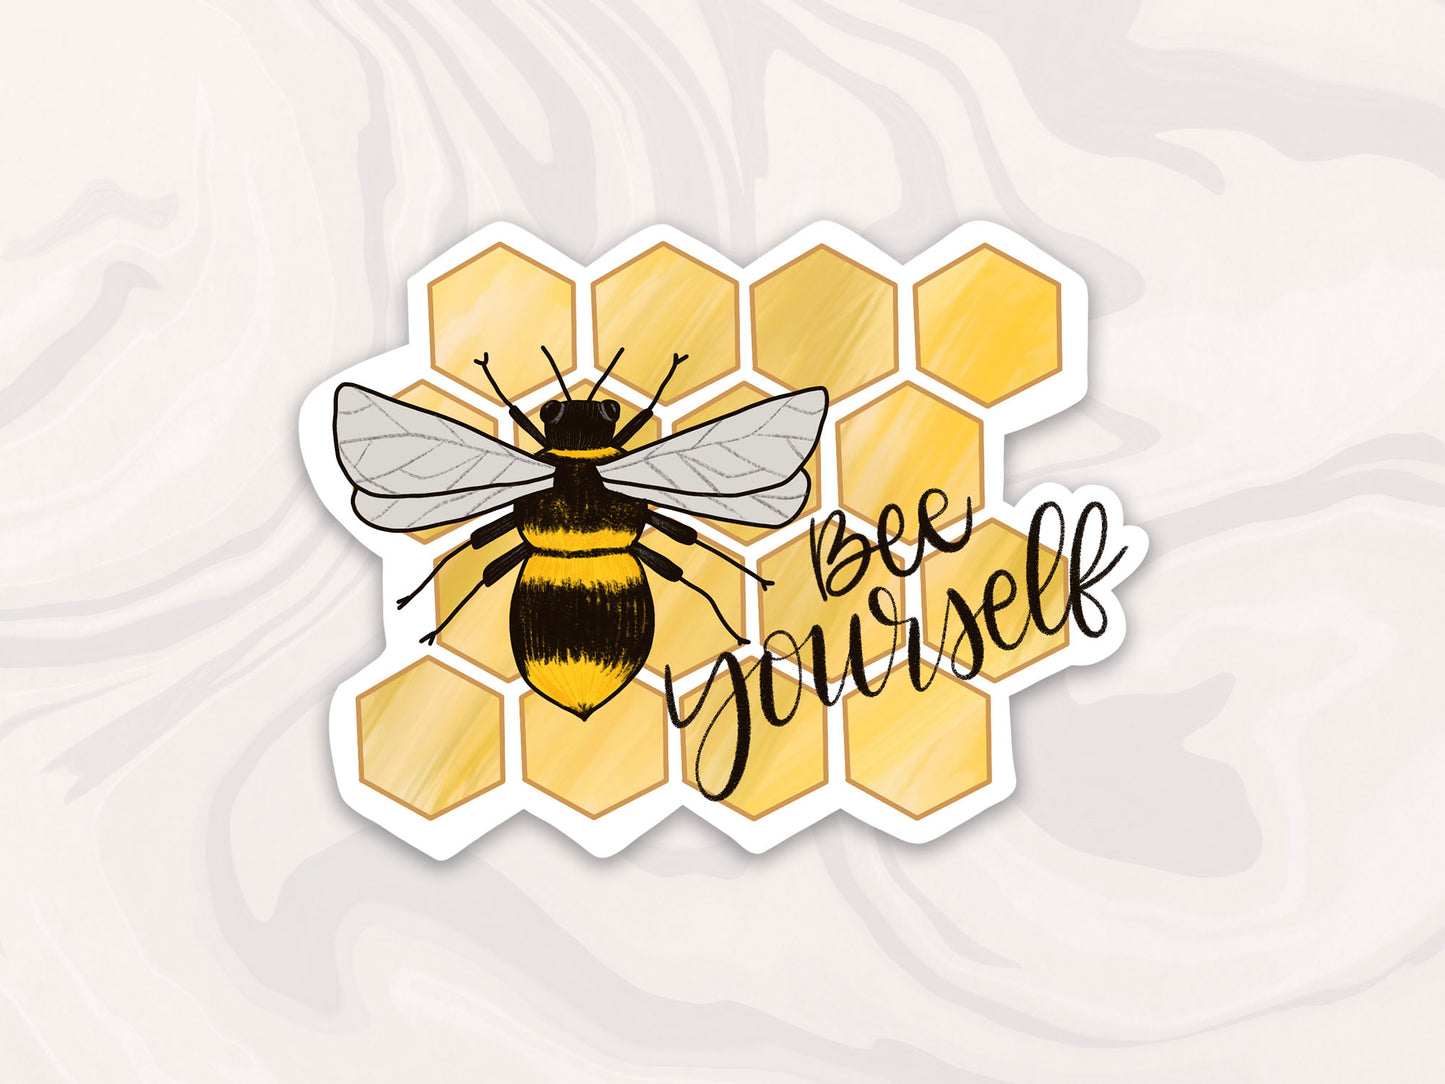 bumble bee sticker set, set of 4 bee themed stickers with positive and encouraging messages, bee yourself sticker